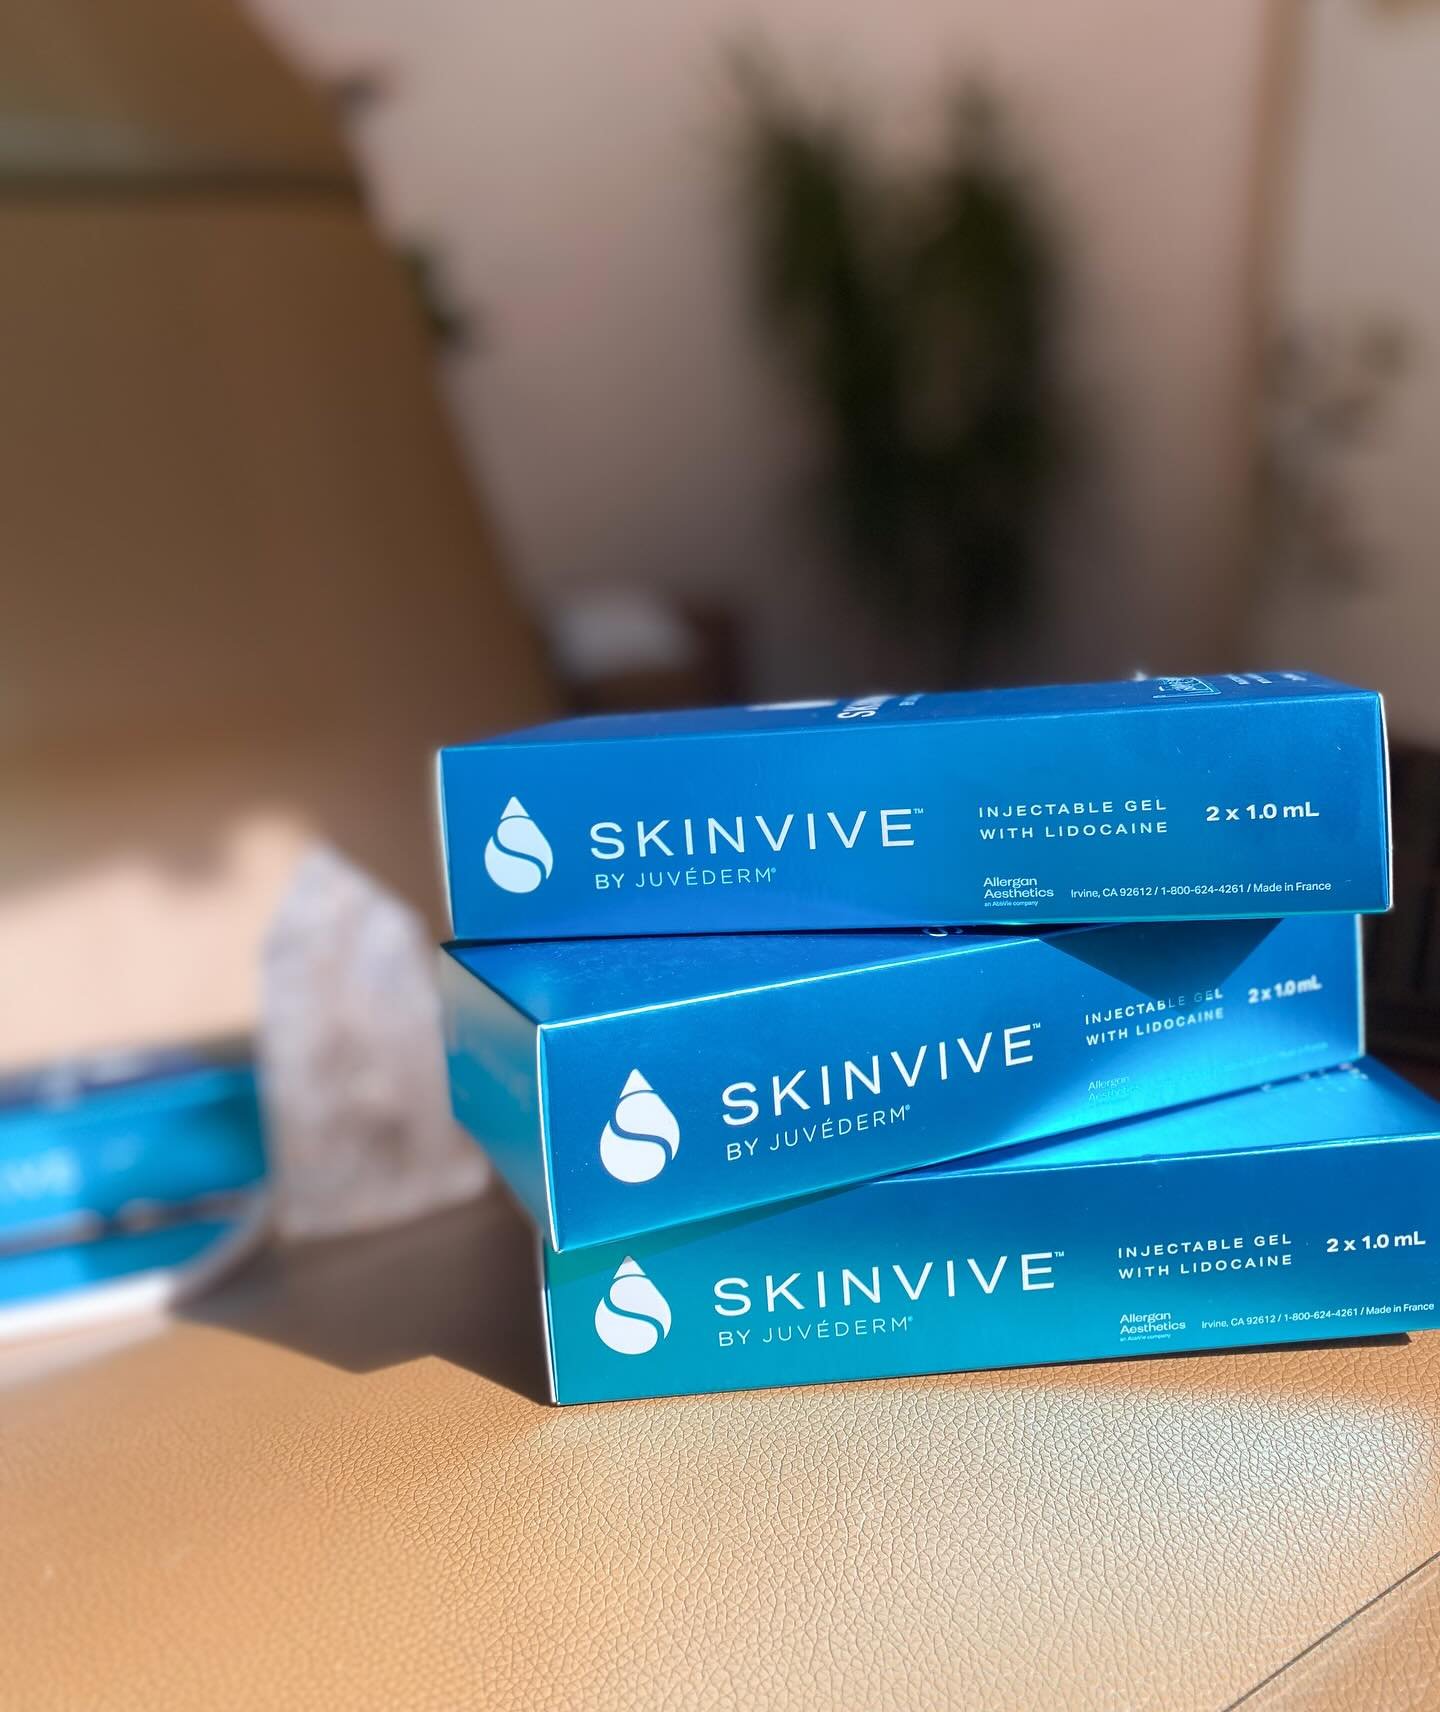 SkinVive ✨ for the ultimate skin hydration 💧💧💧

- Infuses the skin with hyaluronic acid microdroplets through small injections to 
- Improves overall smoothness, texture, tone, and quality 
- Provides hydration, radiance, and glow to the skin

@re